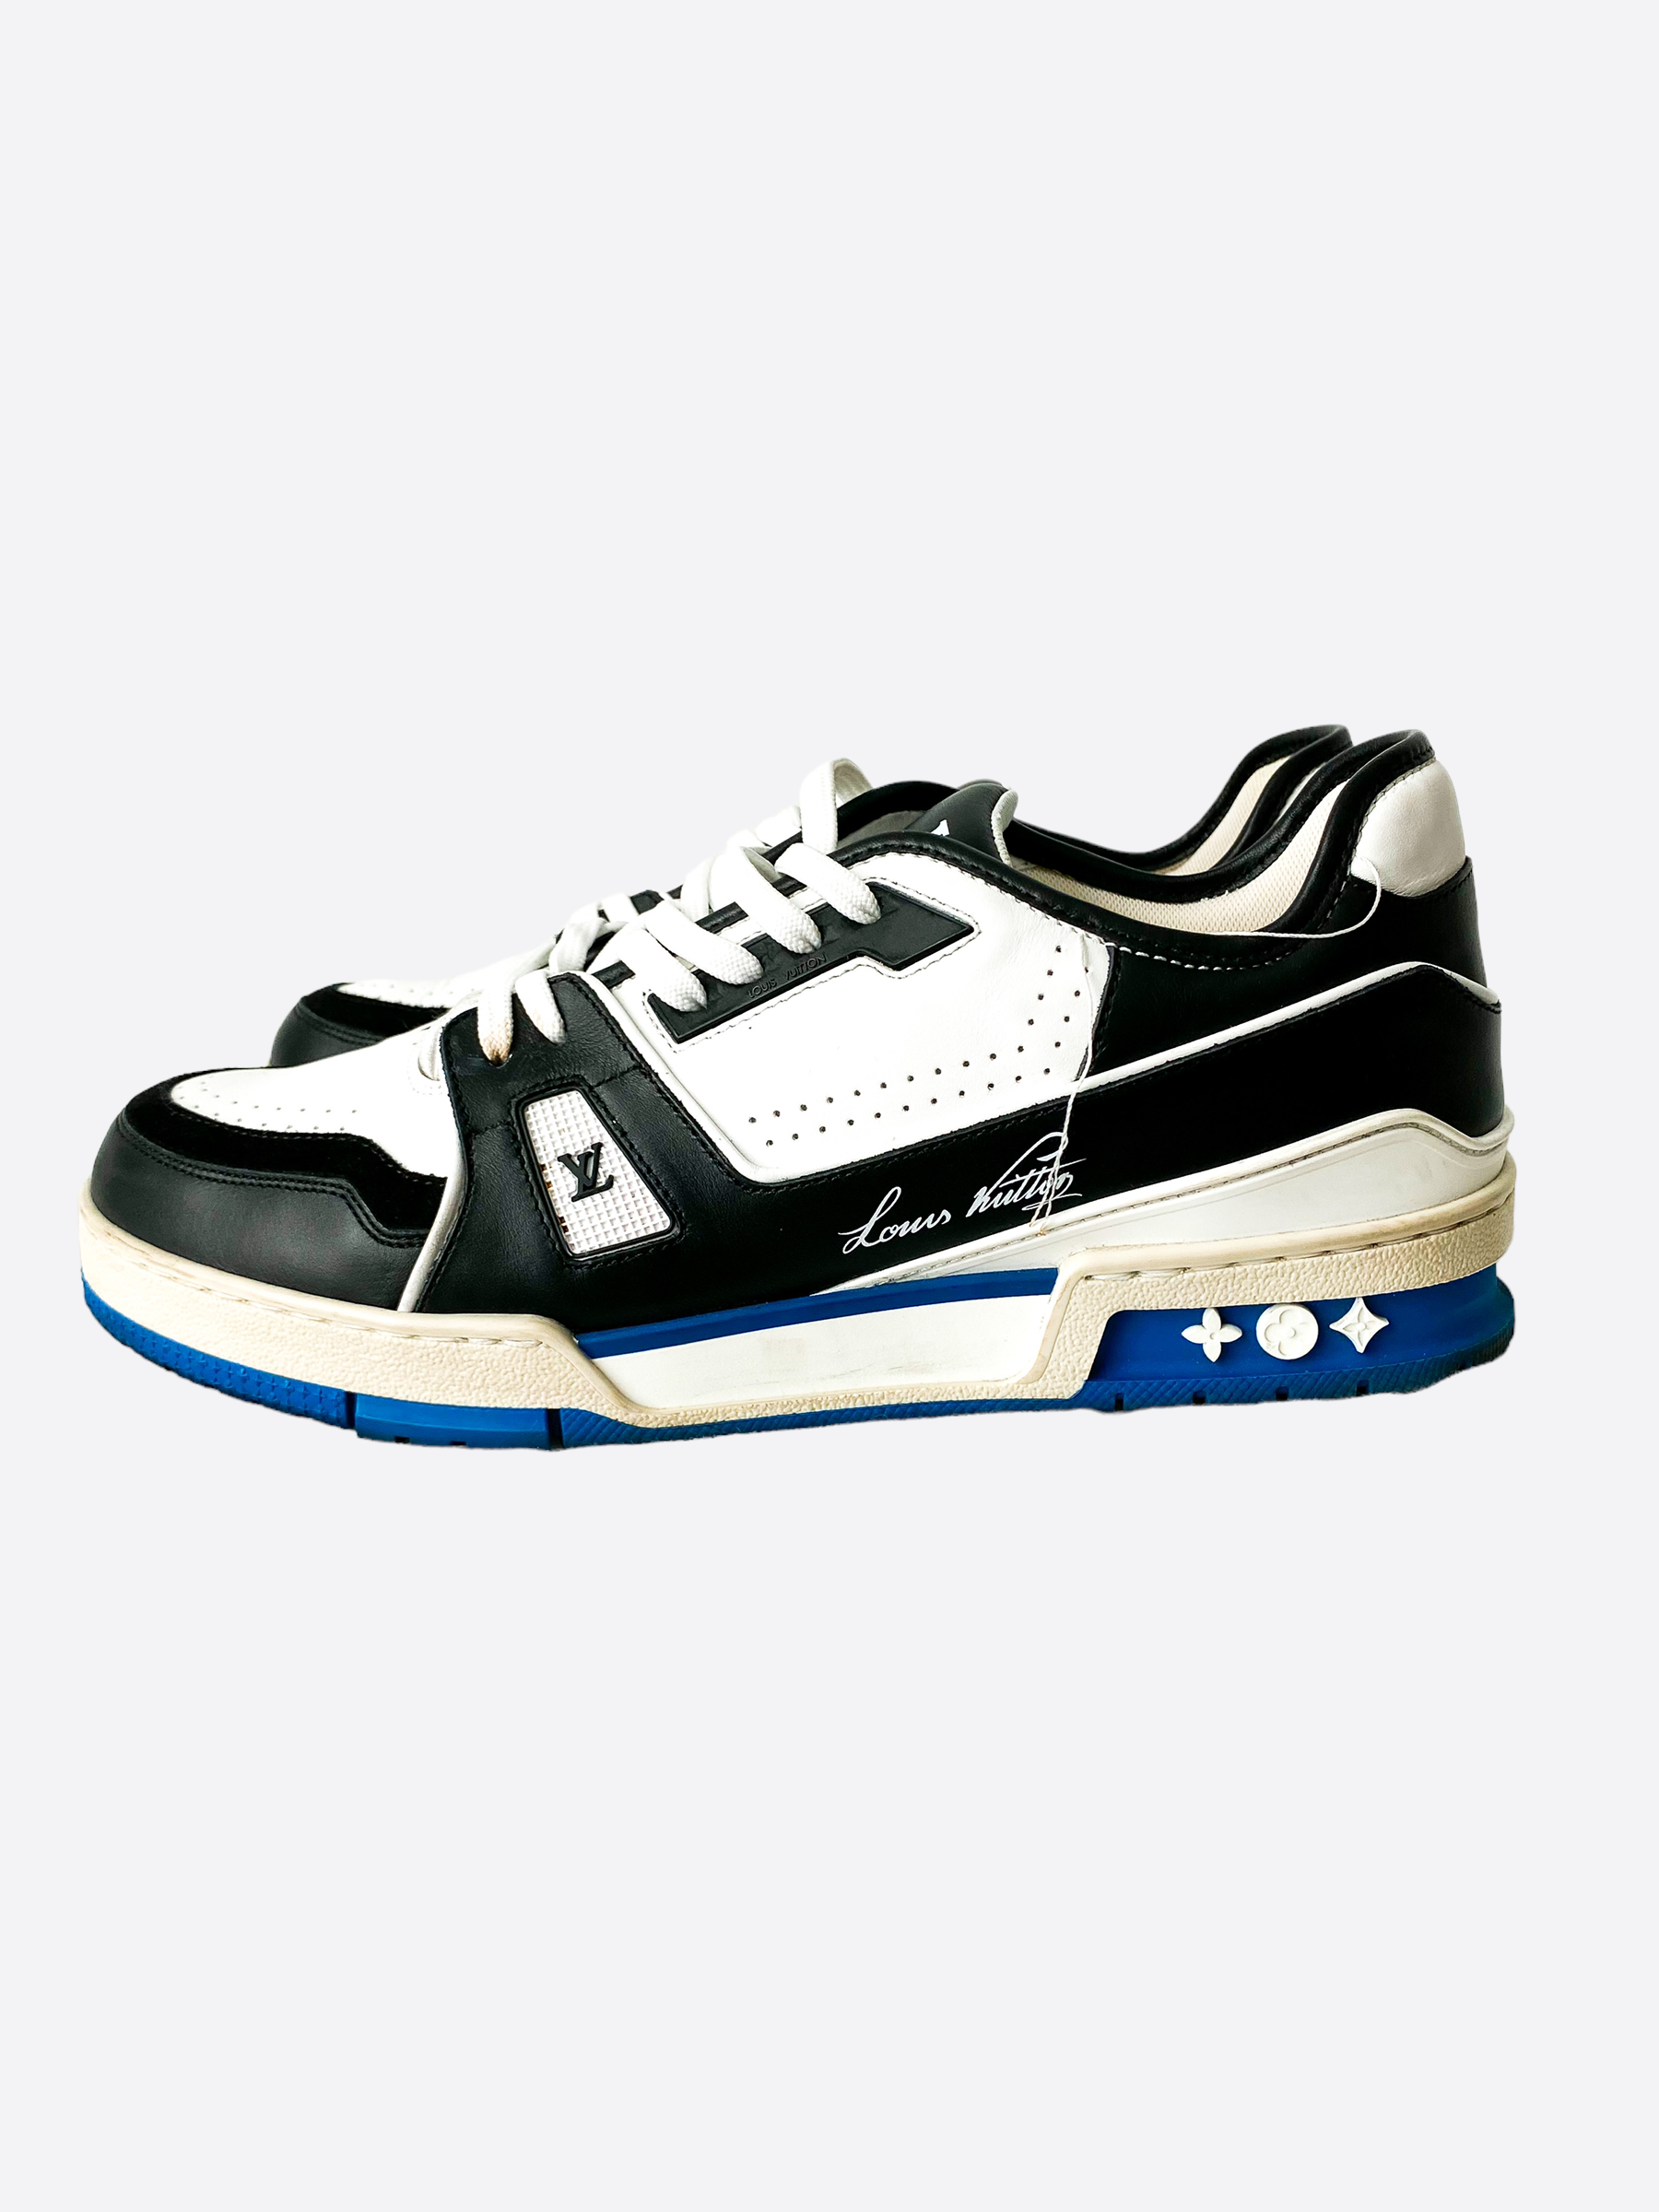 louis vuitton black and white trainers